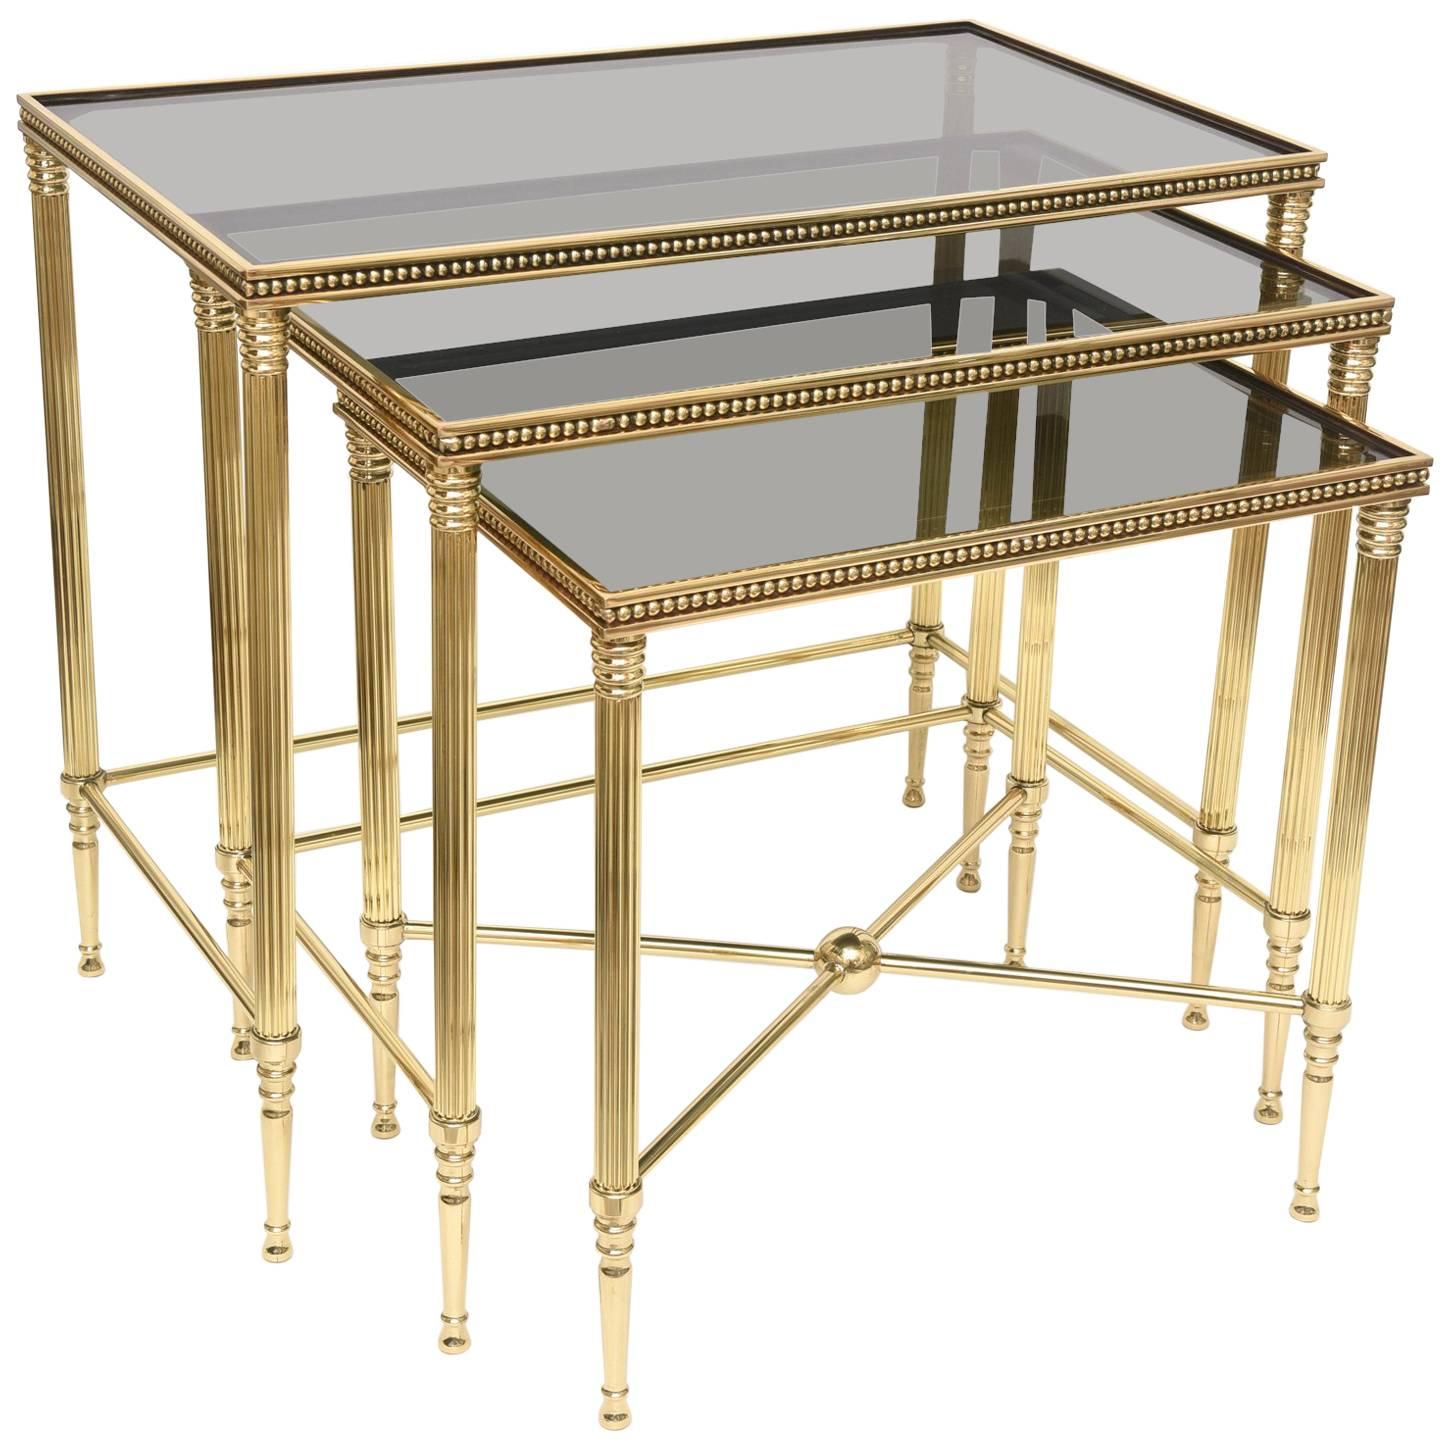 Set of Three Mid-Century Italian Polished Brass and Glass Nesting Tables /SALE